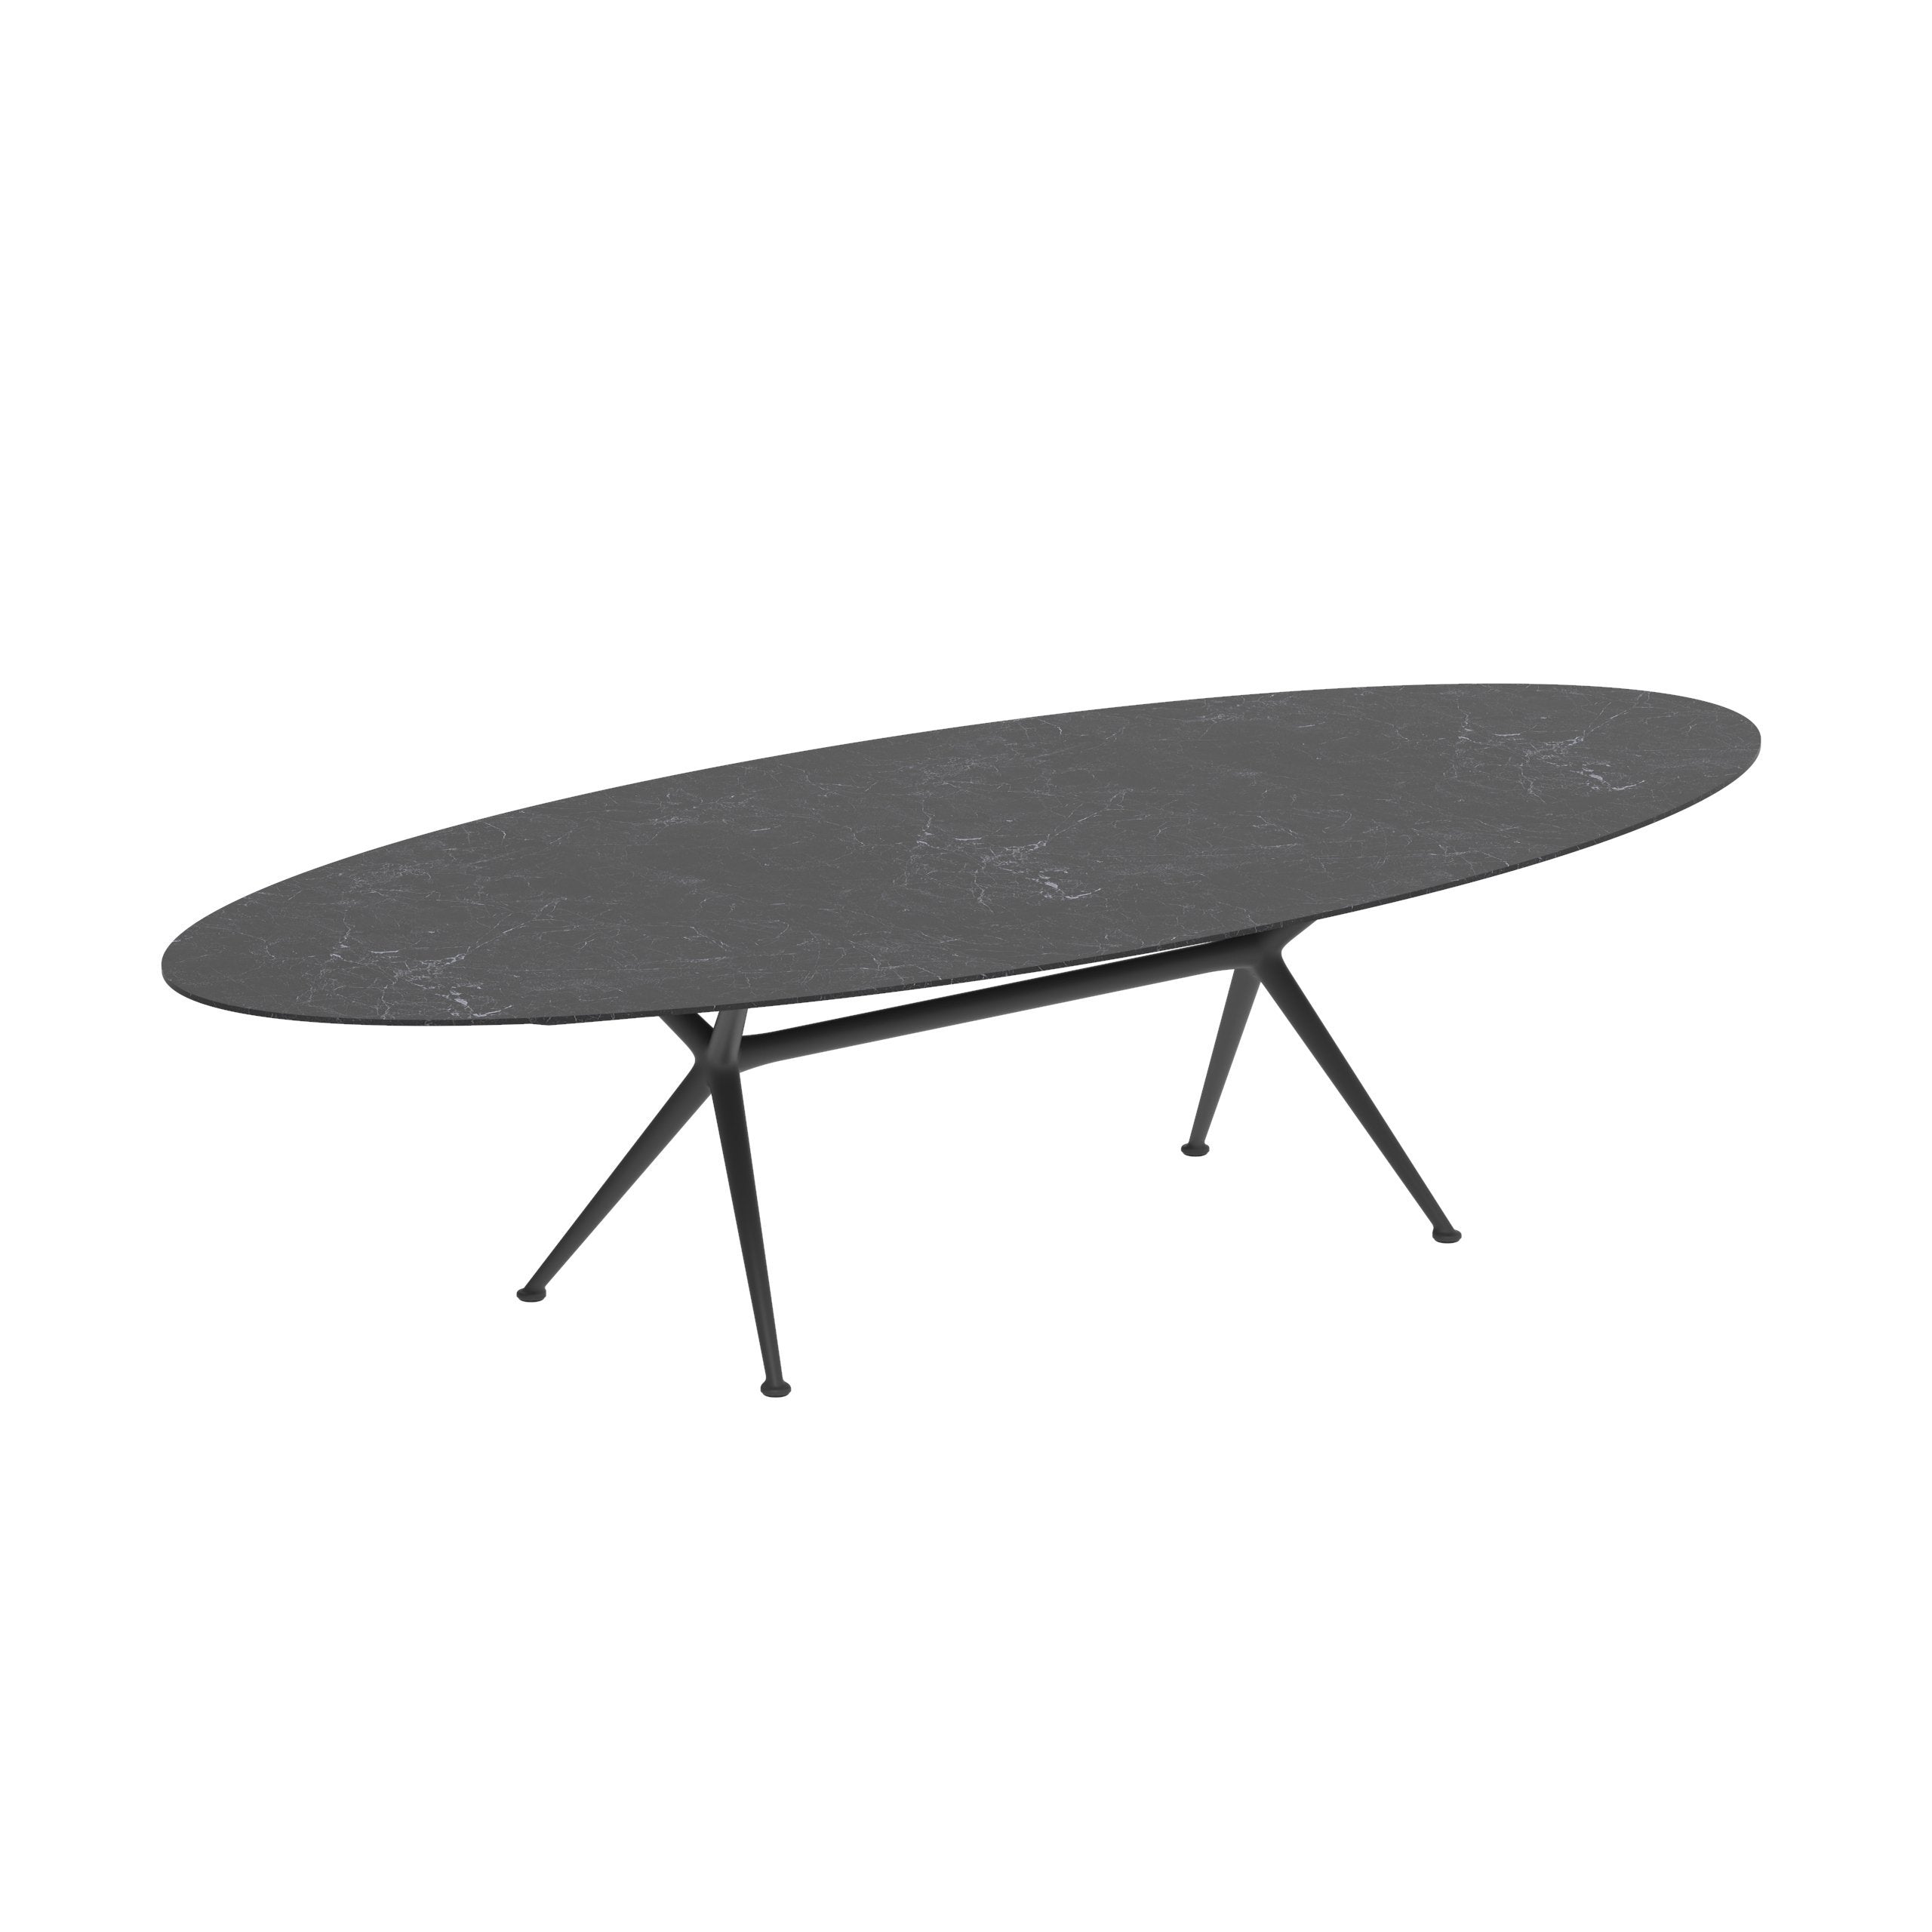 EXES Oval Table